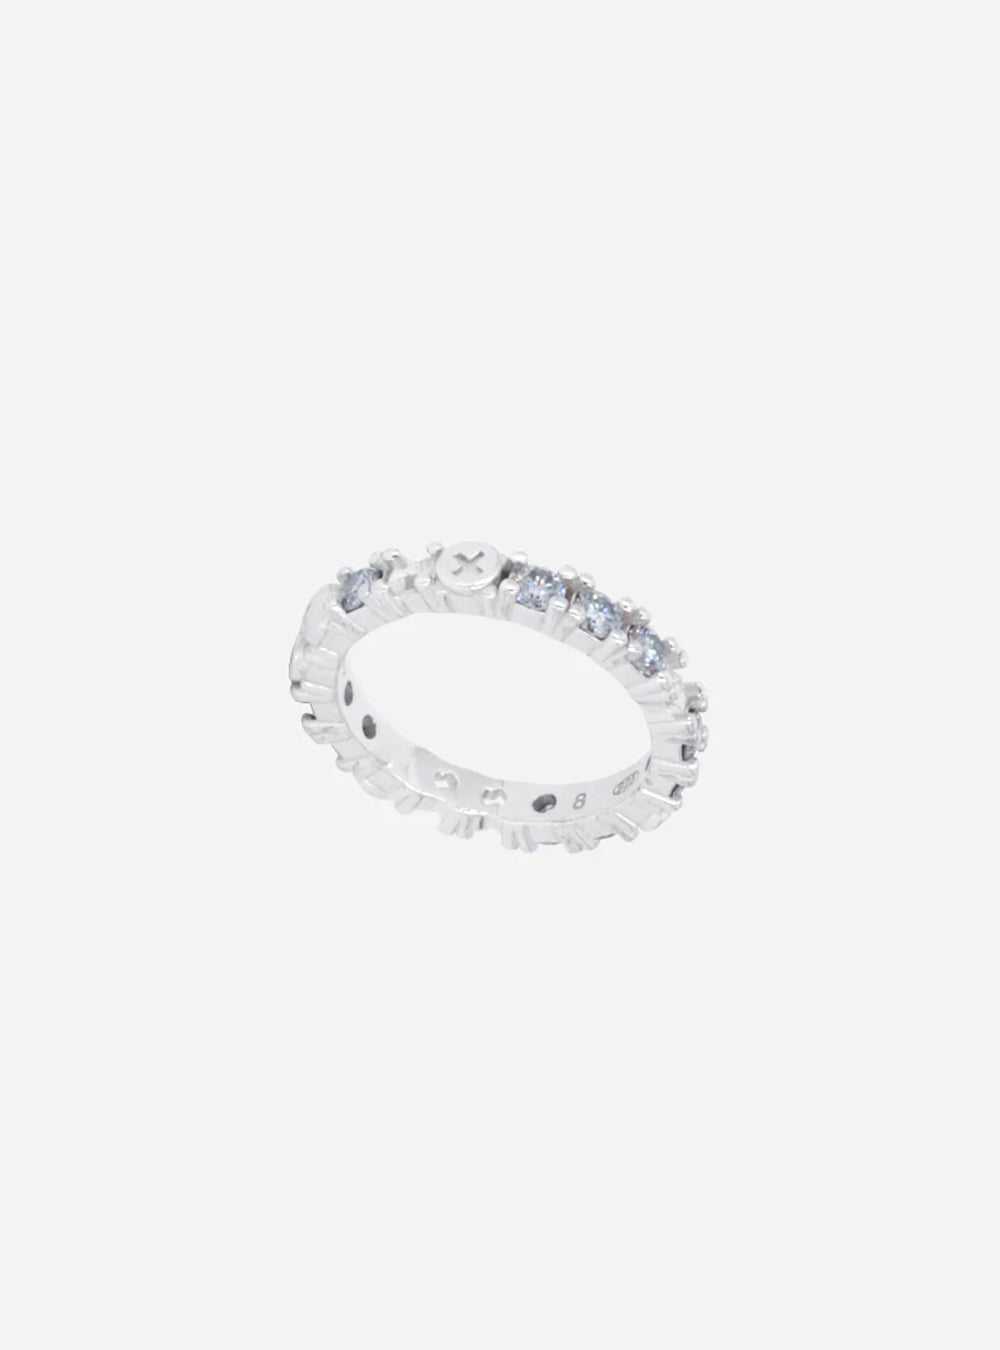 a Broken eternity ring with gray moissanite stones from MIDNIGHTFACTORY.